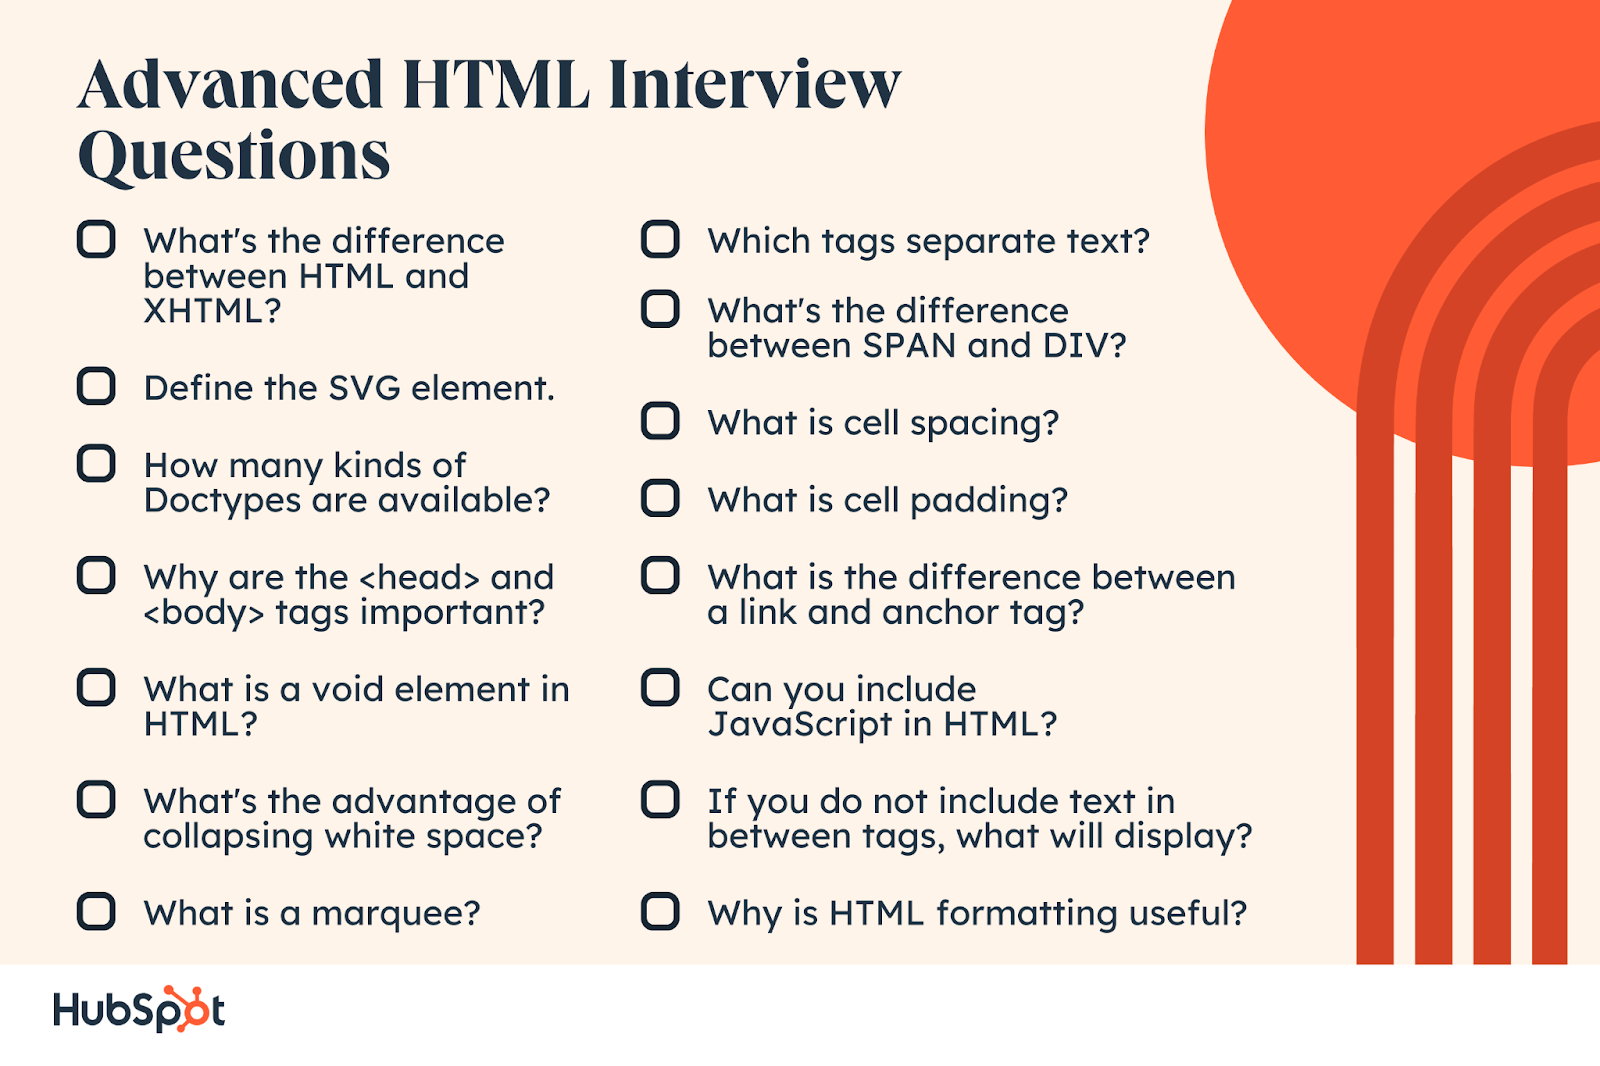 HTML5 Interview Questions. What's HTML5? What were the primary goals of releasing HTML5? Identify a few key features of HTML5.